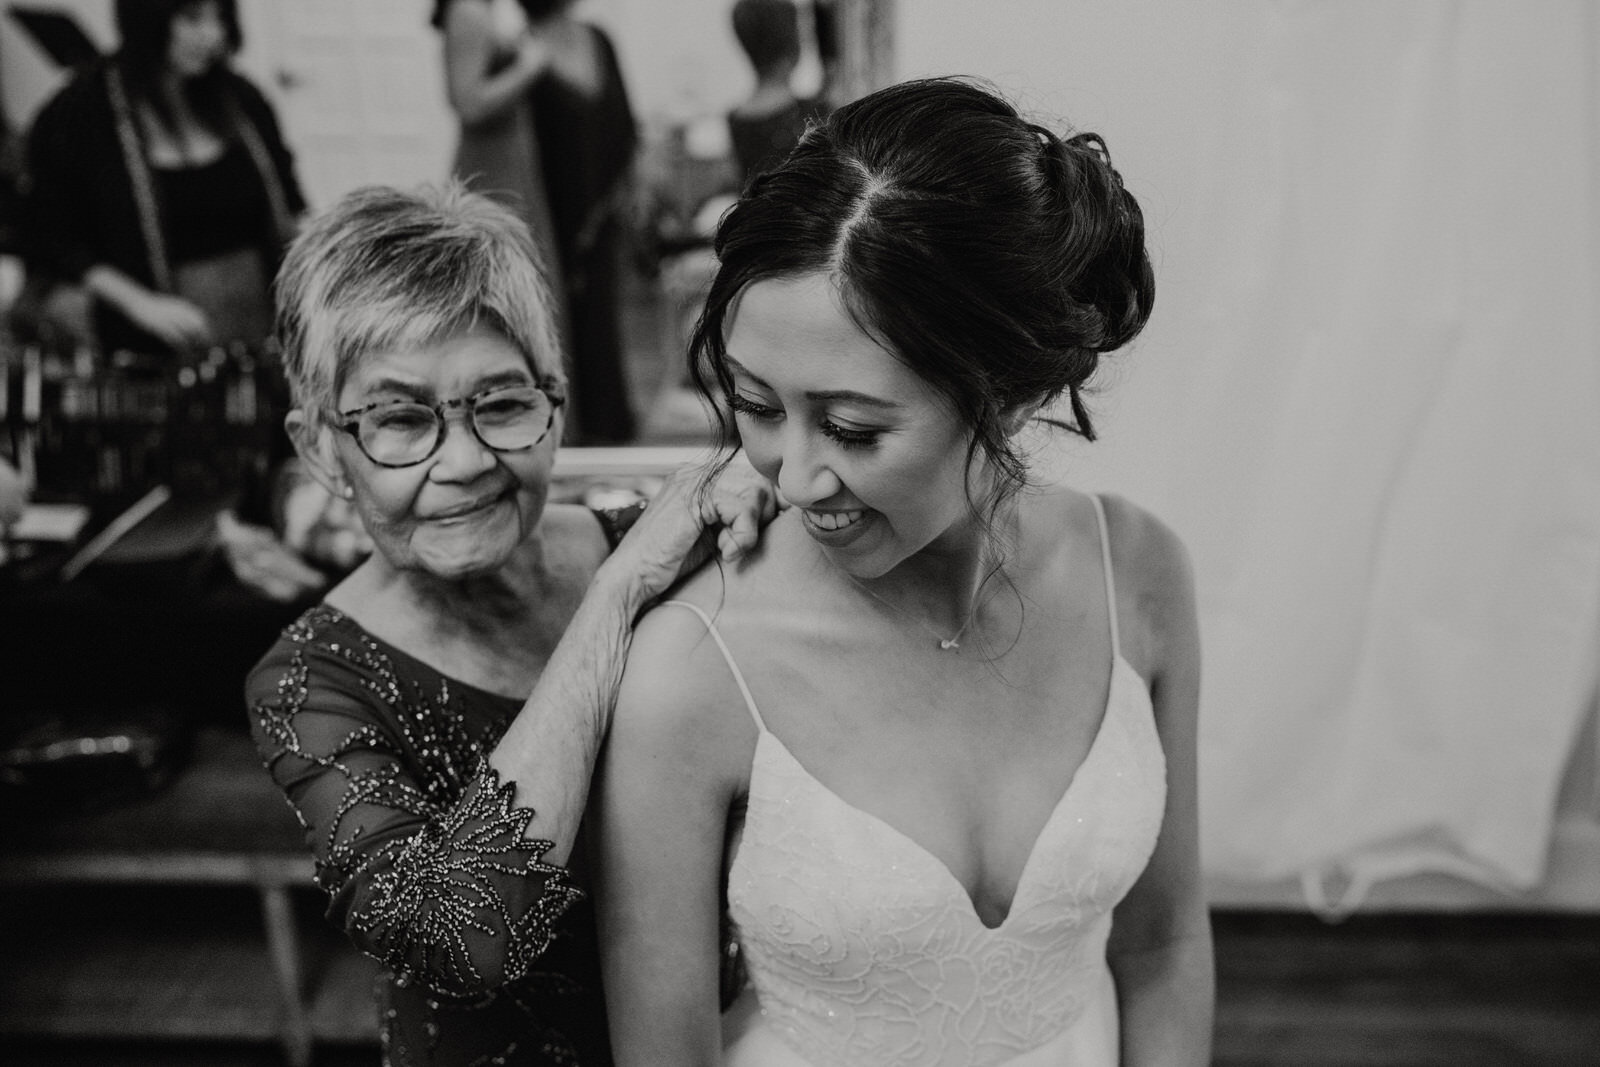 Candid photo of bride and grandmother at Franciscan Gardens wedding in San Juan Capistrano, CA by Kept Record www.keptrecord.com